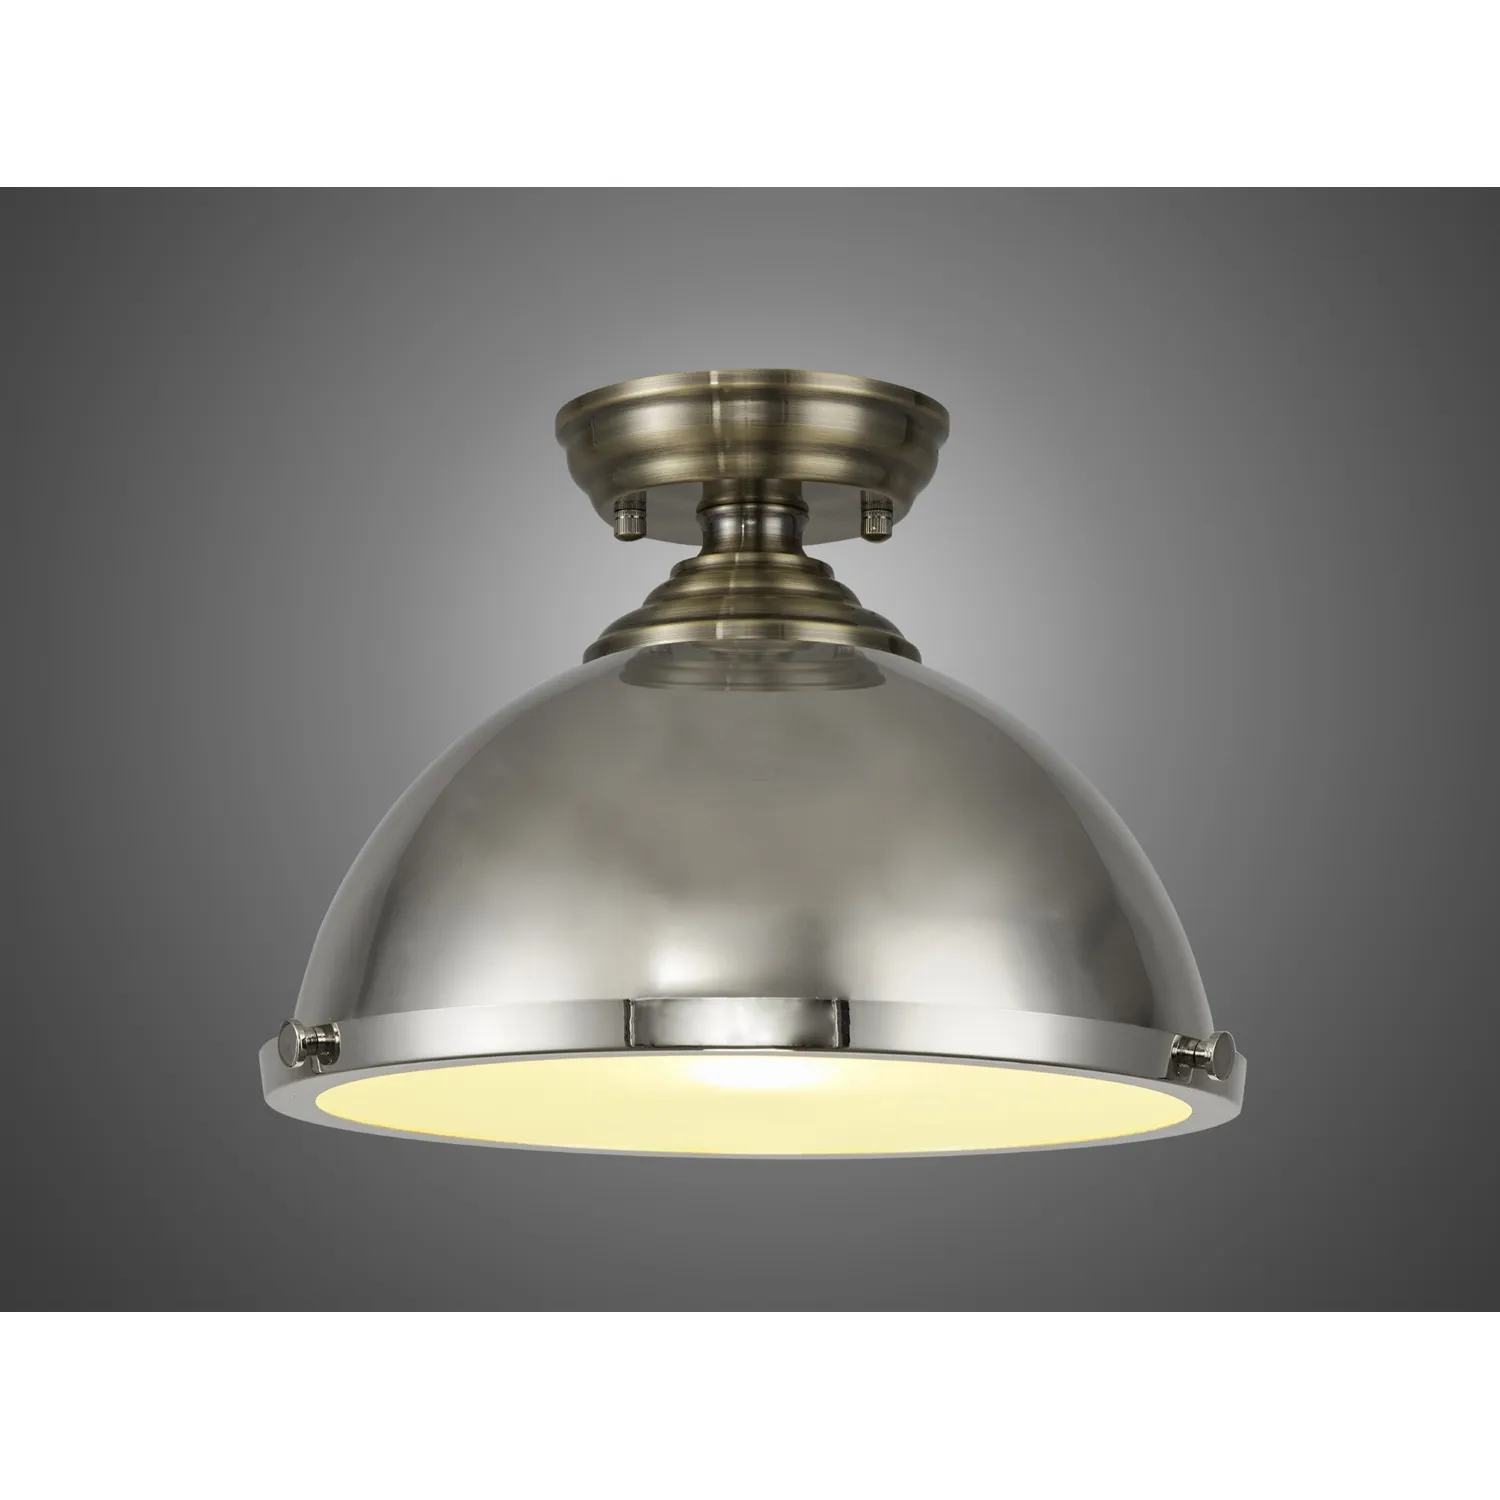 Billericay 1 Light Flush Ceiling E27 With Round 31cm Metal Shade Antique Brass Polished Nickel Frosted White